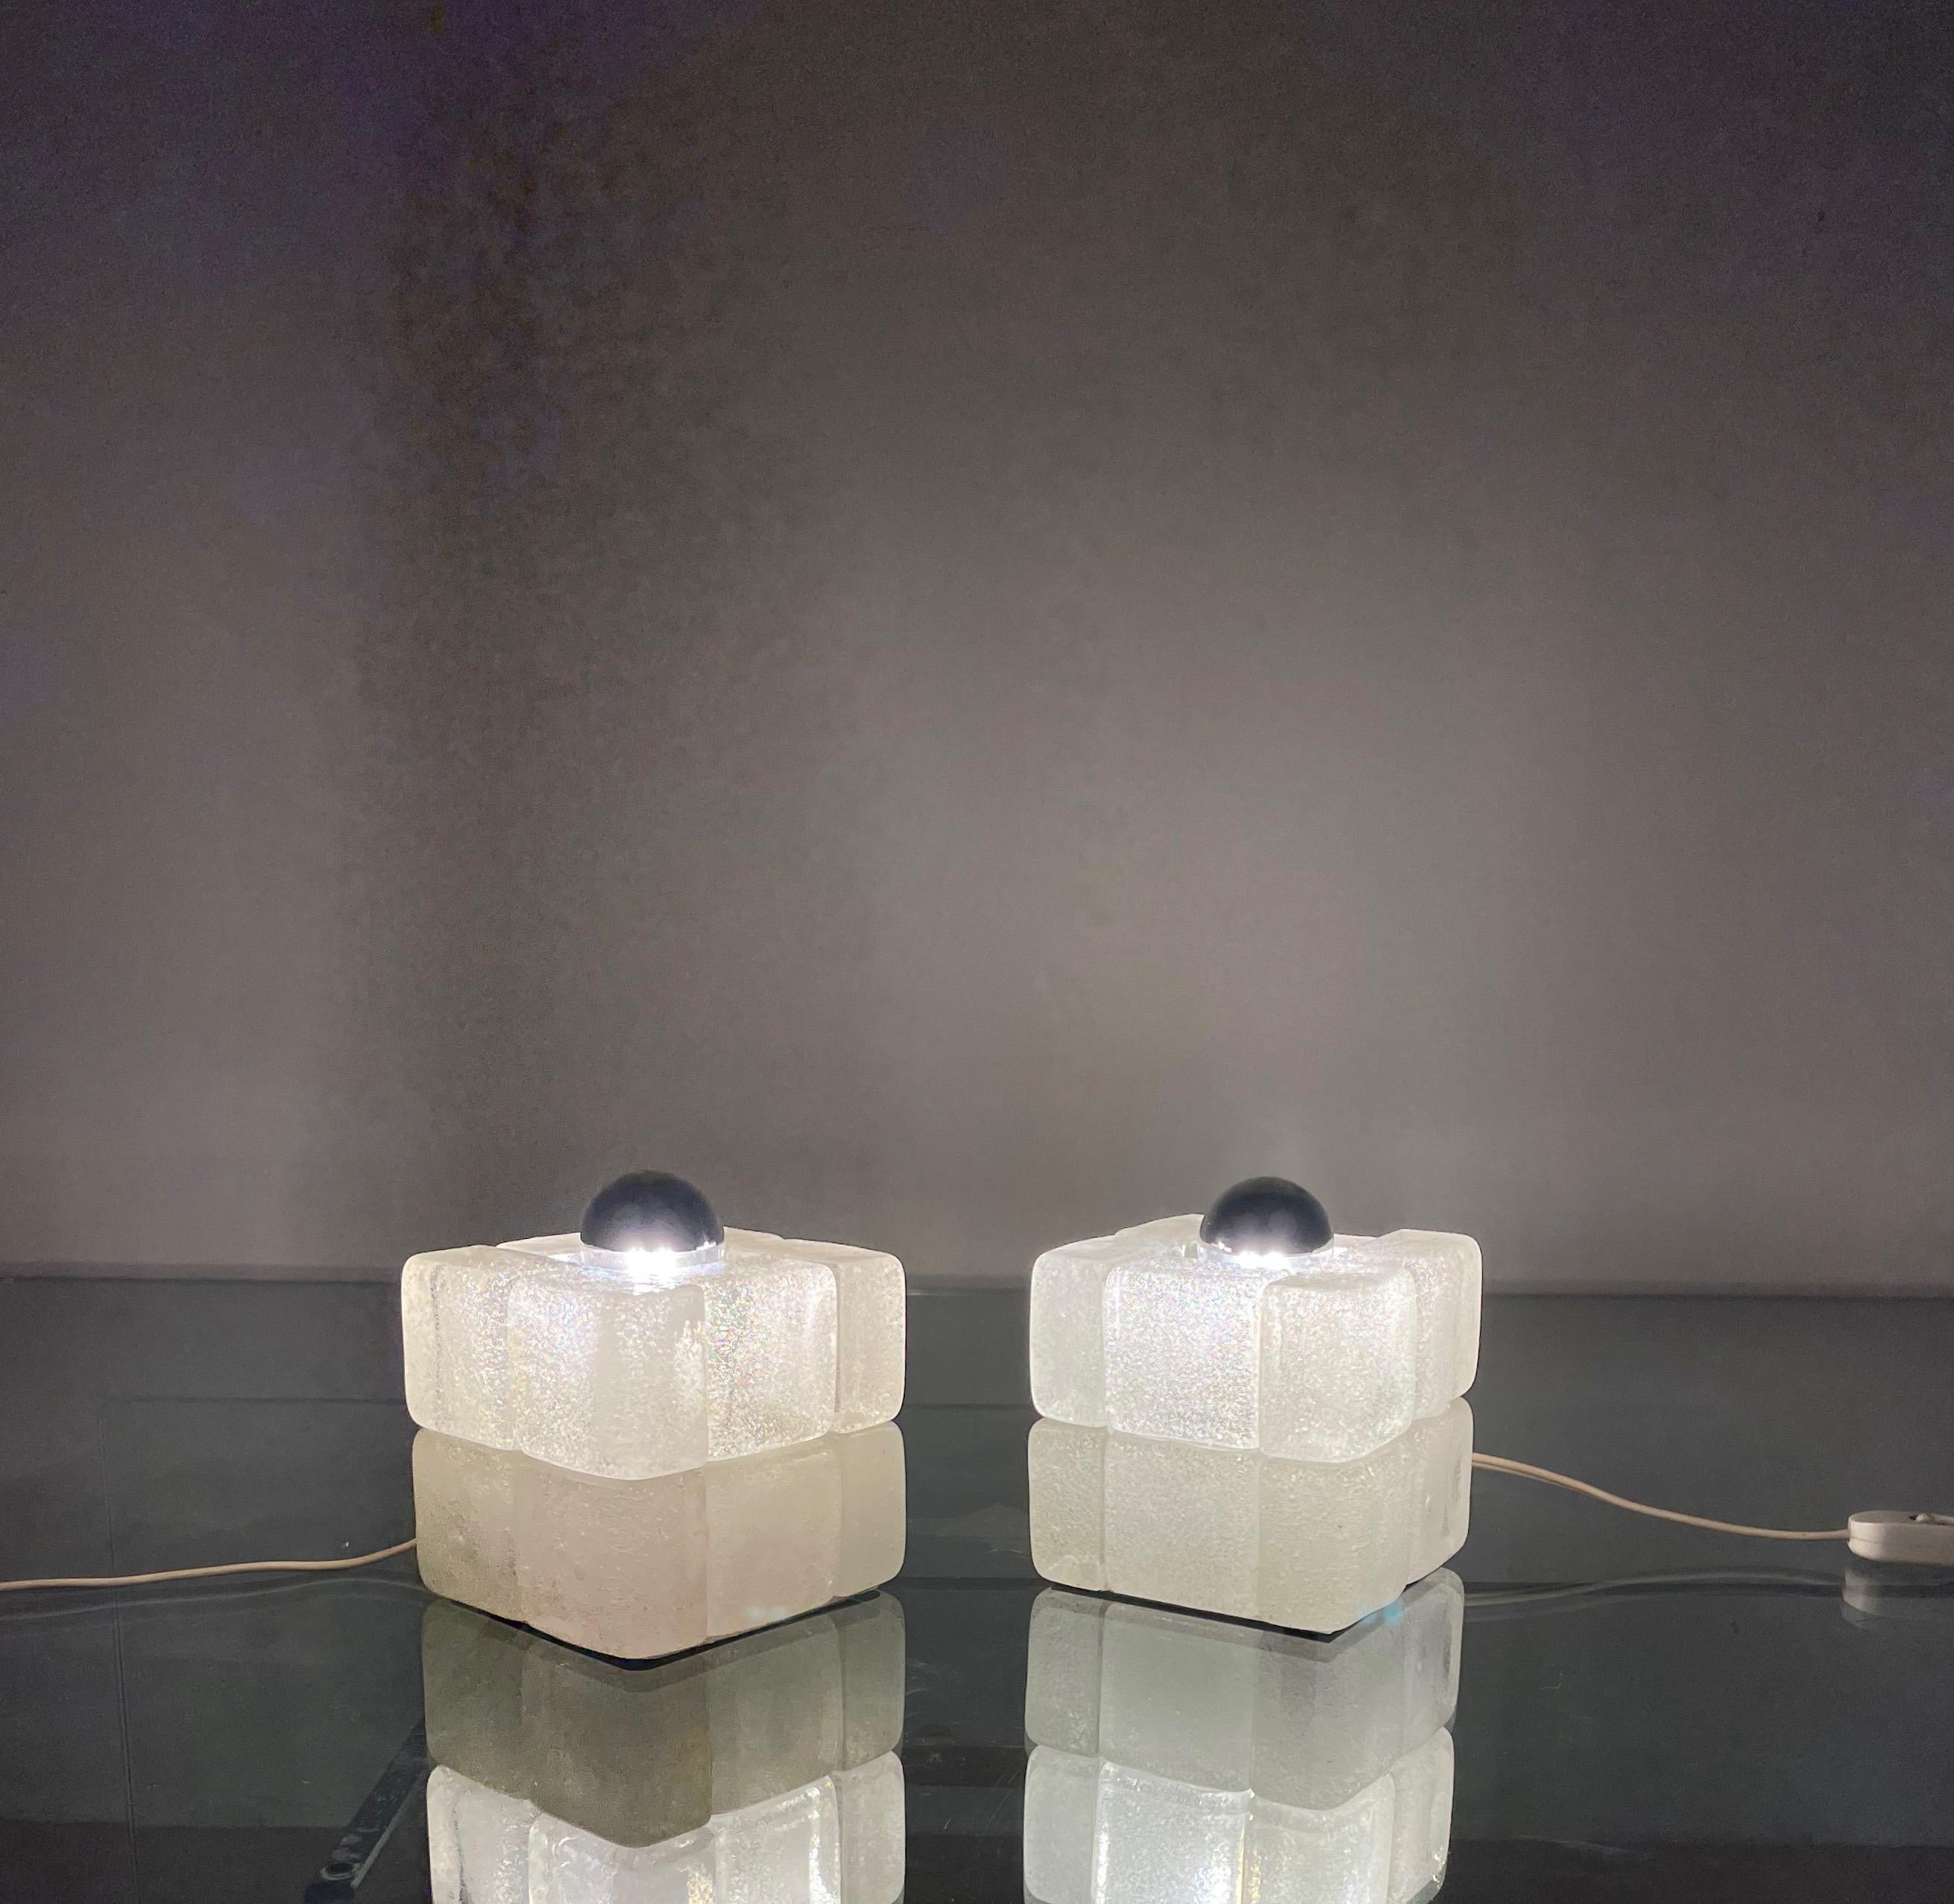 Pair of Murano Glass Cube Lamps by Albano Poli for Poliarte, Italy, 1970s For Sale 4